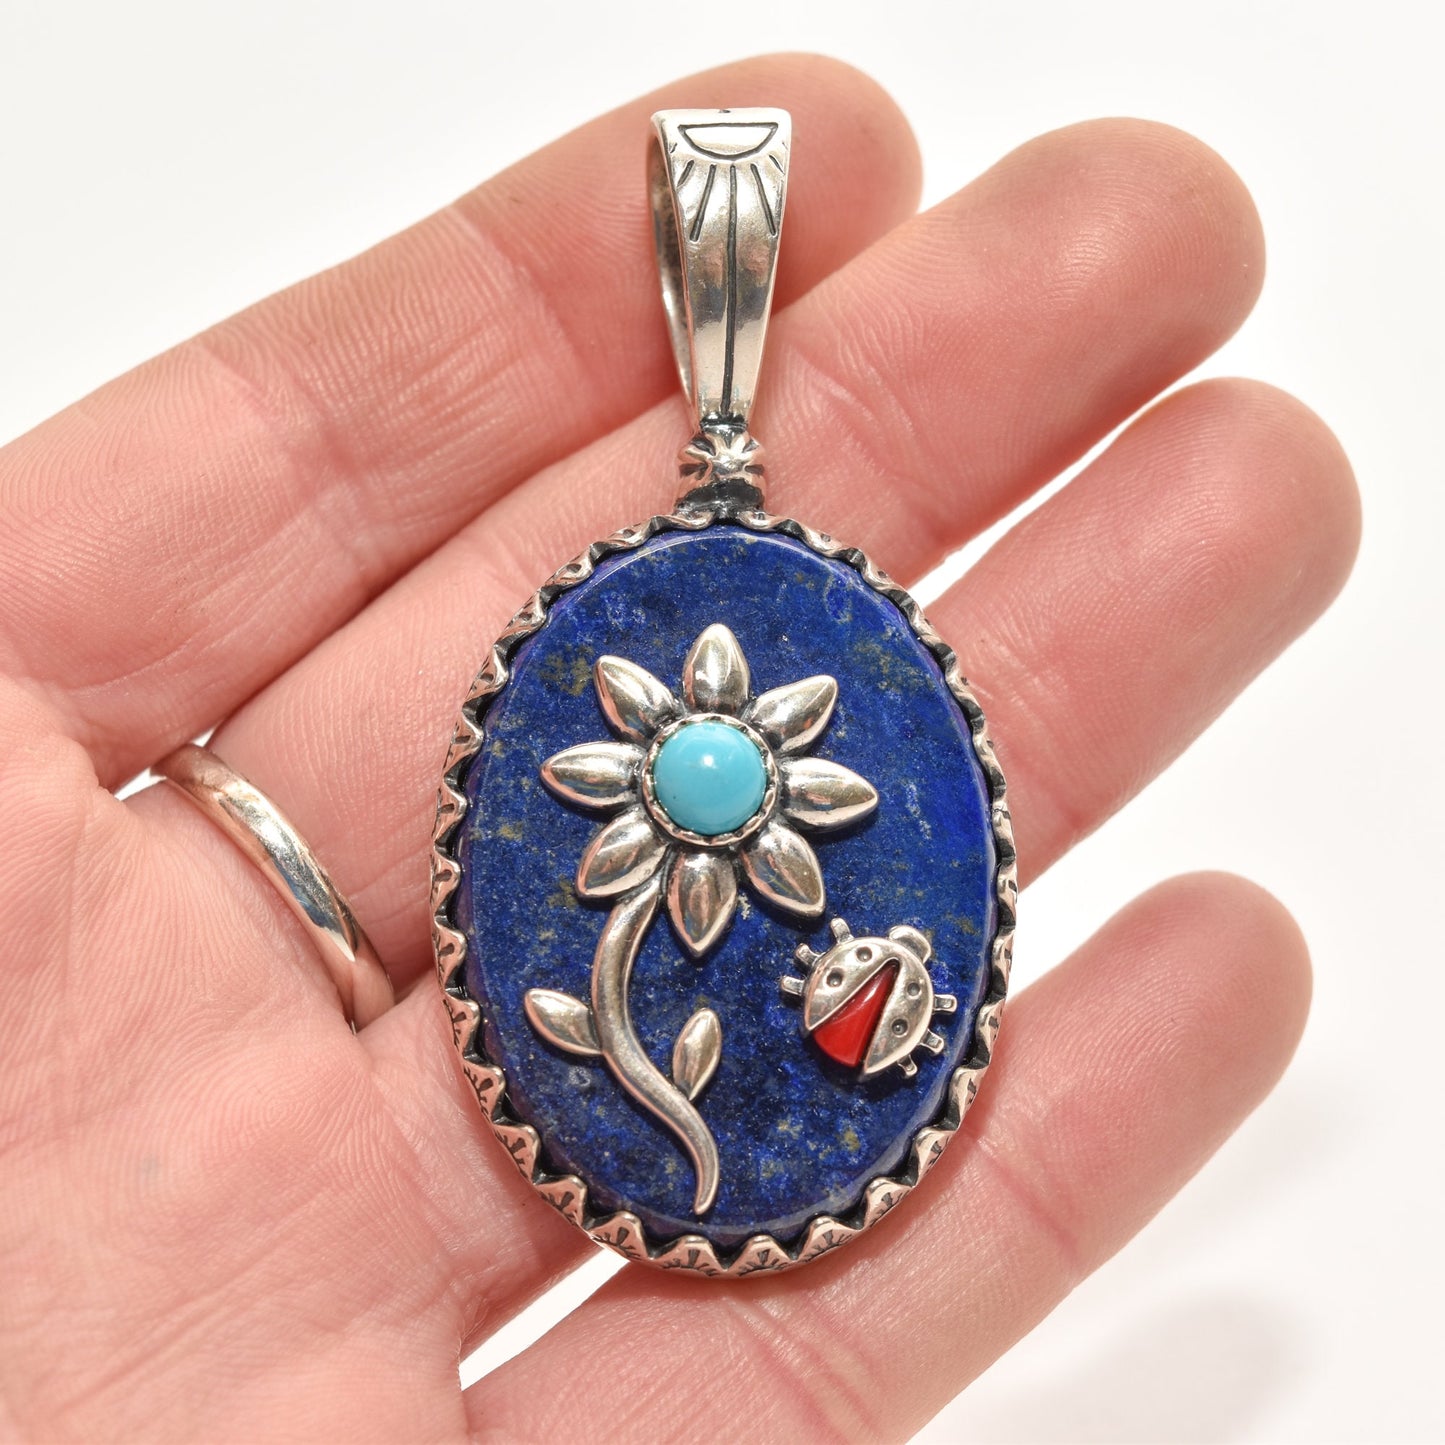 Sterling Silver Lapis Lazuli, Turquoise, Coral, Flower Ladybug Pendant, Veronica Dine For Carolyn Pollack